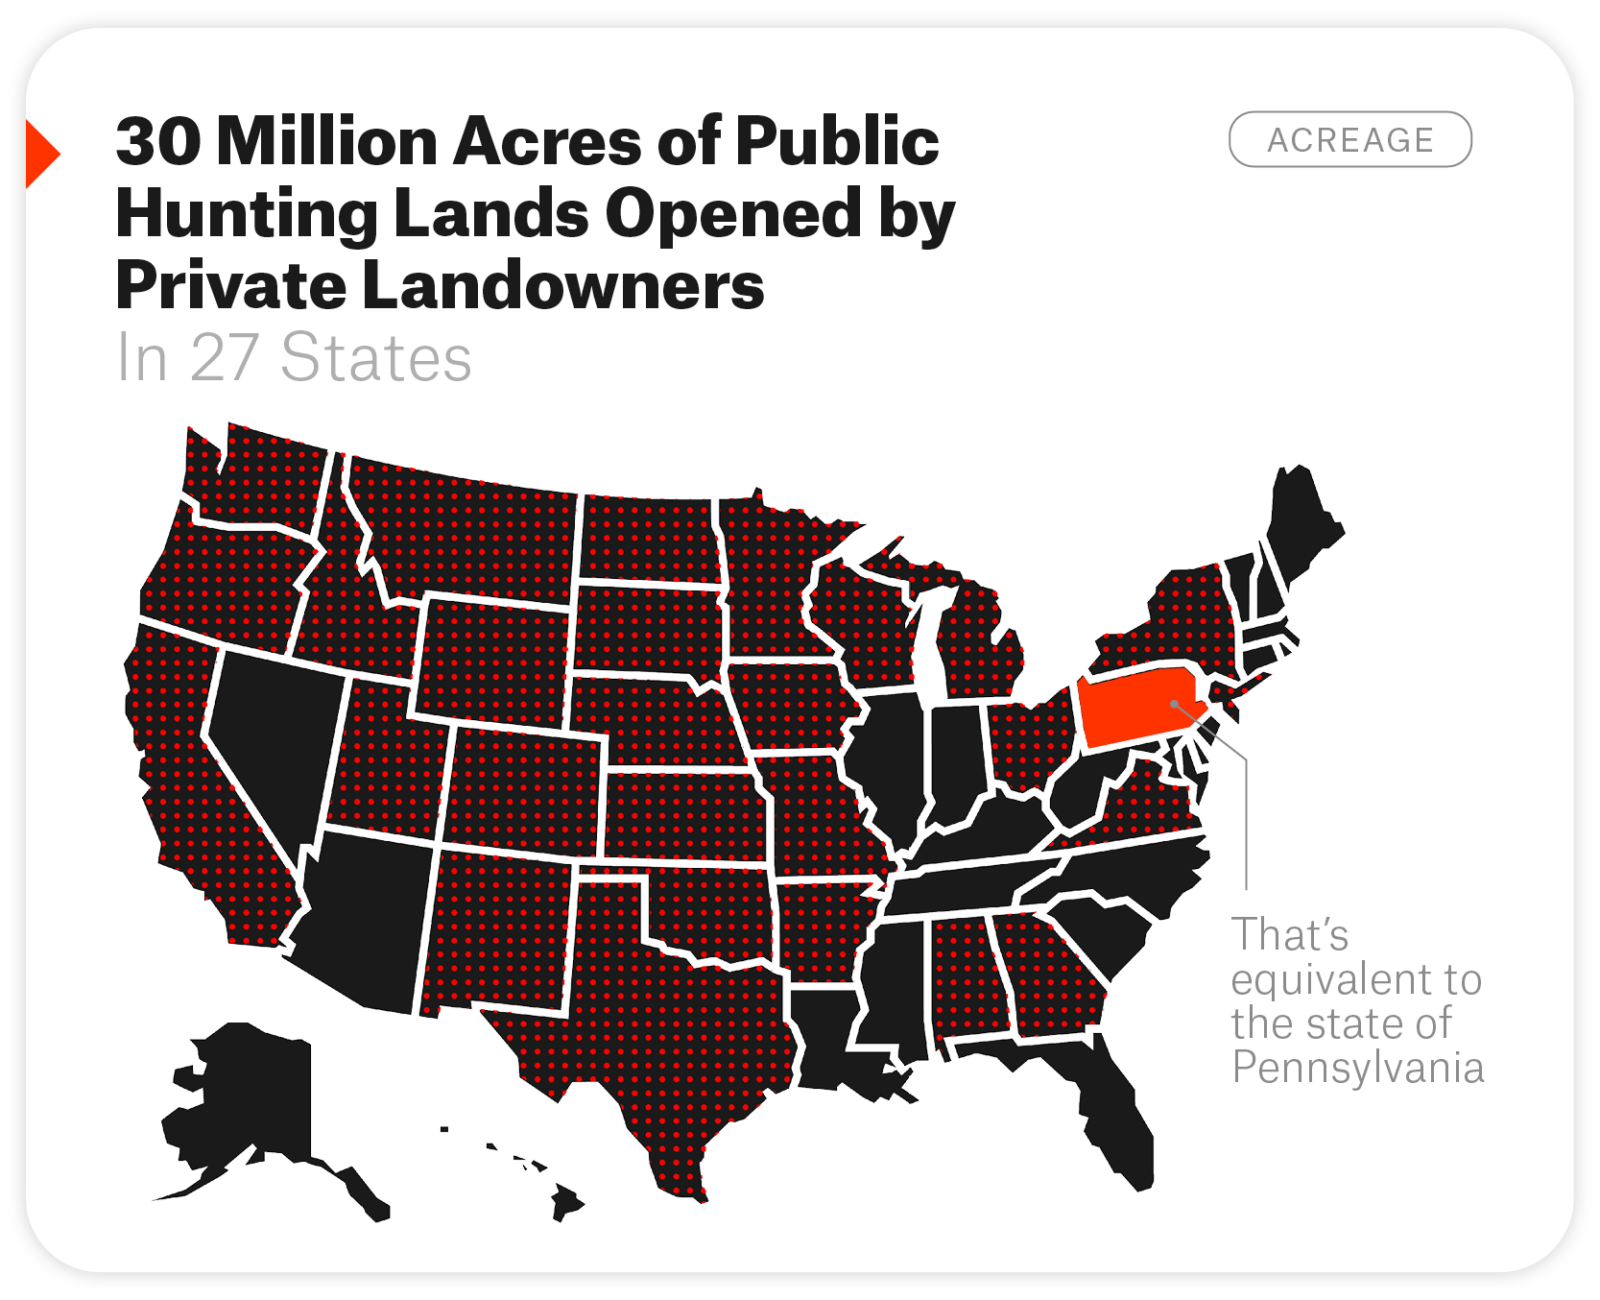 A map of the US with the 27 states highlighted that have public hunting land opened by private landowners.